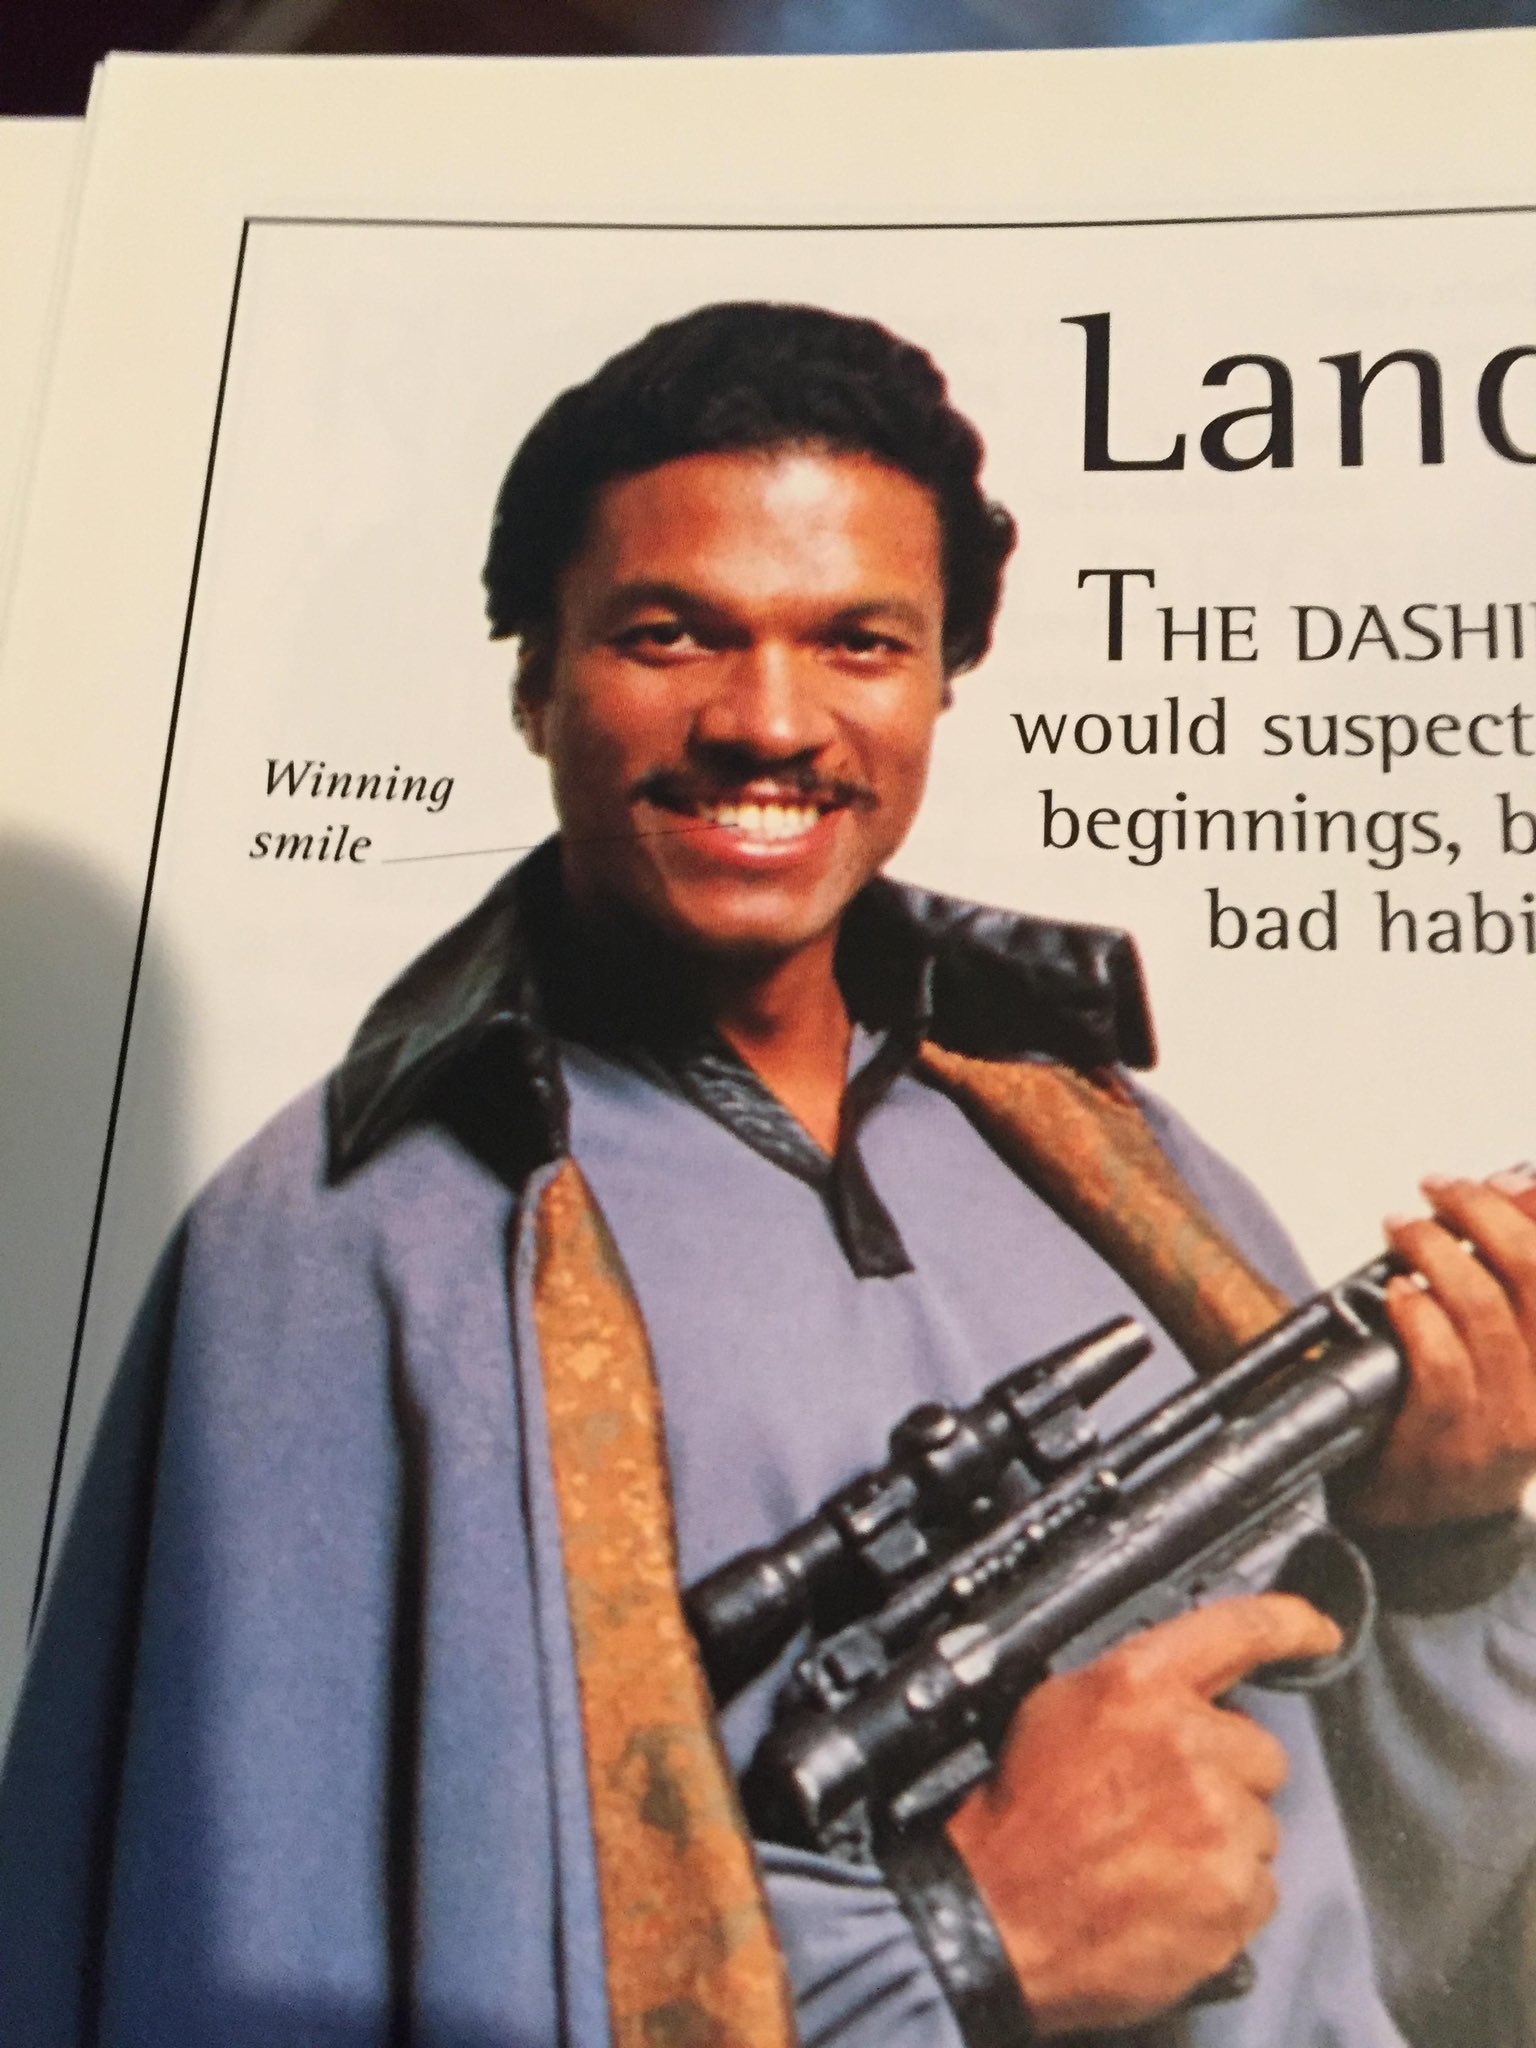 HAPPY BIRTHDAY BILLY DEE WILLIAMS!!! 84 years in and your winning smile is still going strong 